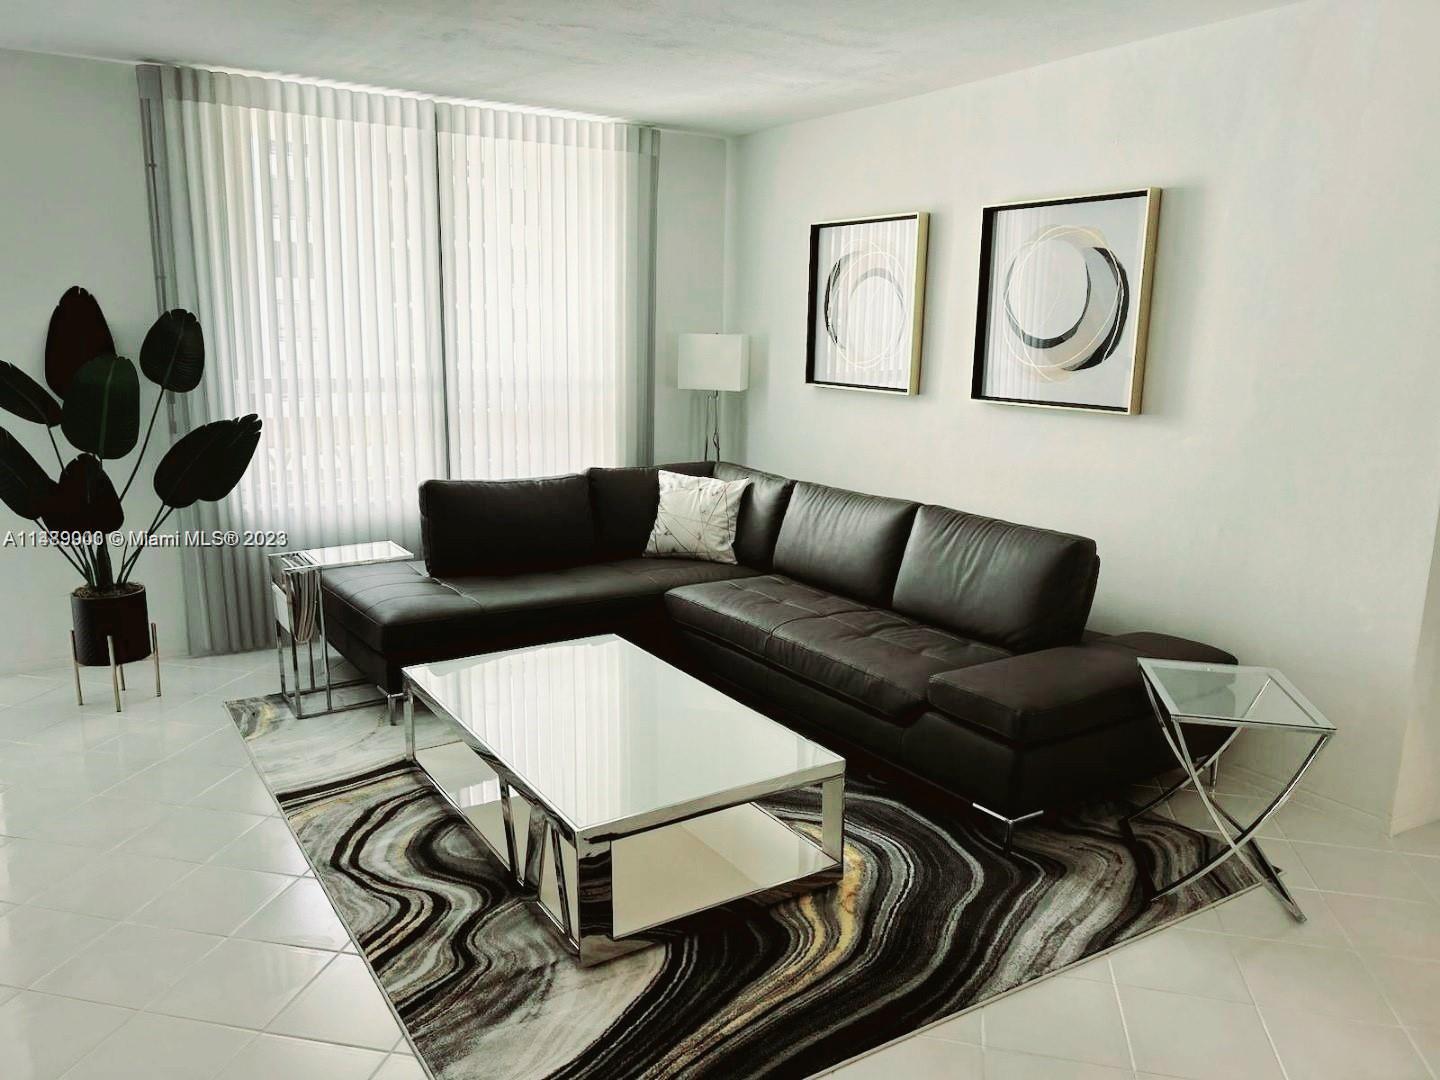 Beautifully furnished and very spacious 2bed/2baths condo in the exclusive Bal Harbor. Right on the 